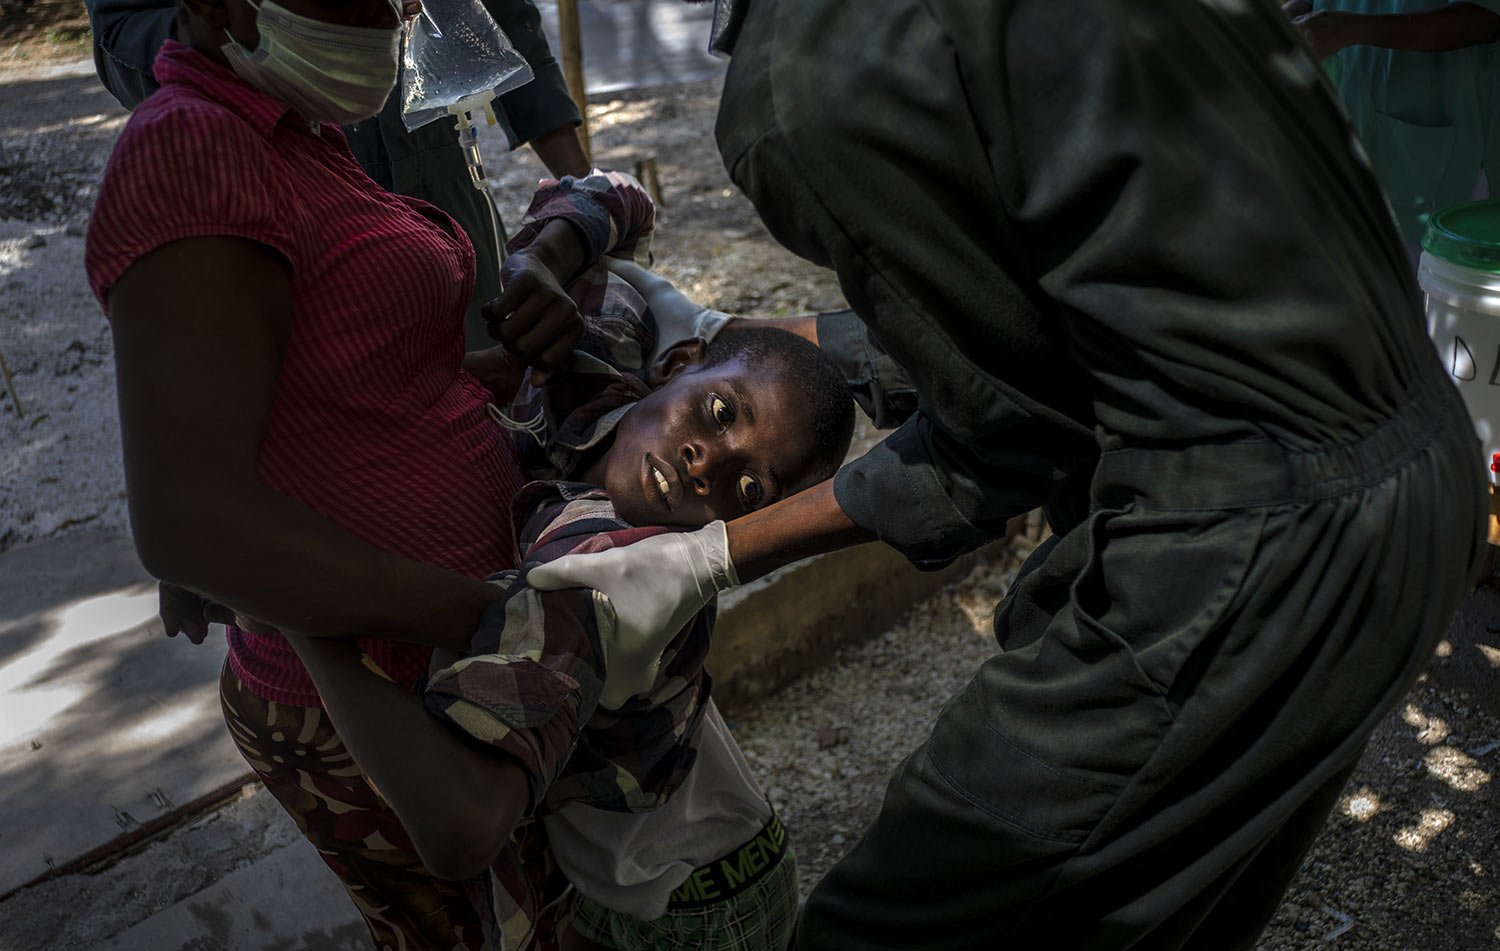  A youth suffering cholera symptoms is helped upon arrival at a clinic run by Doctors Without Borders in Port-au-Prince, Haiti, Thursday, Oct. 27, 2022. For the first time in three years, people in Haiti have been dying of cholera, raising concerns a